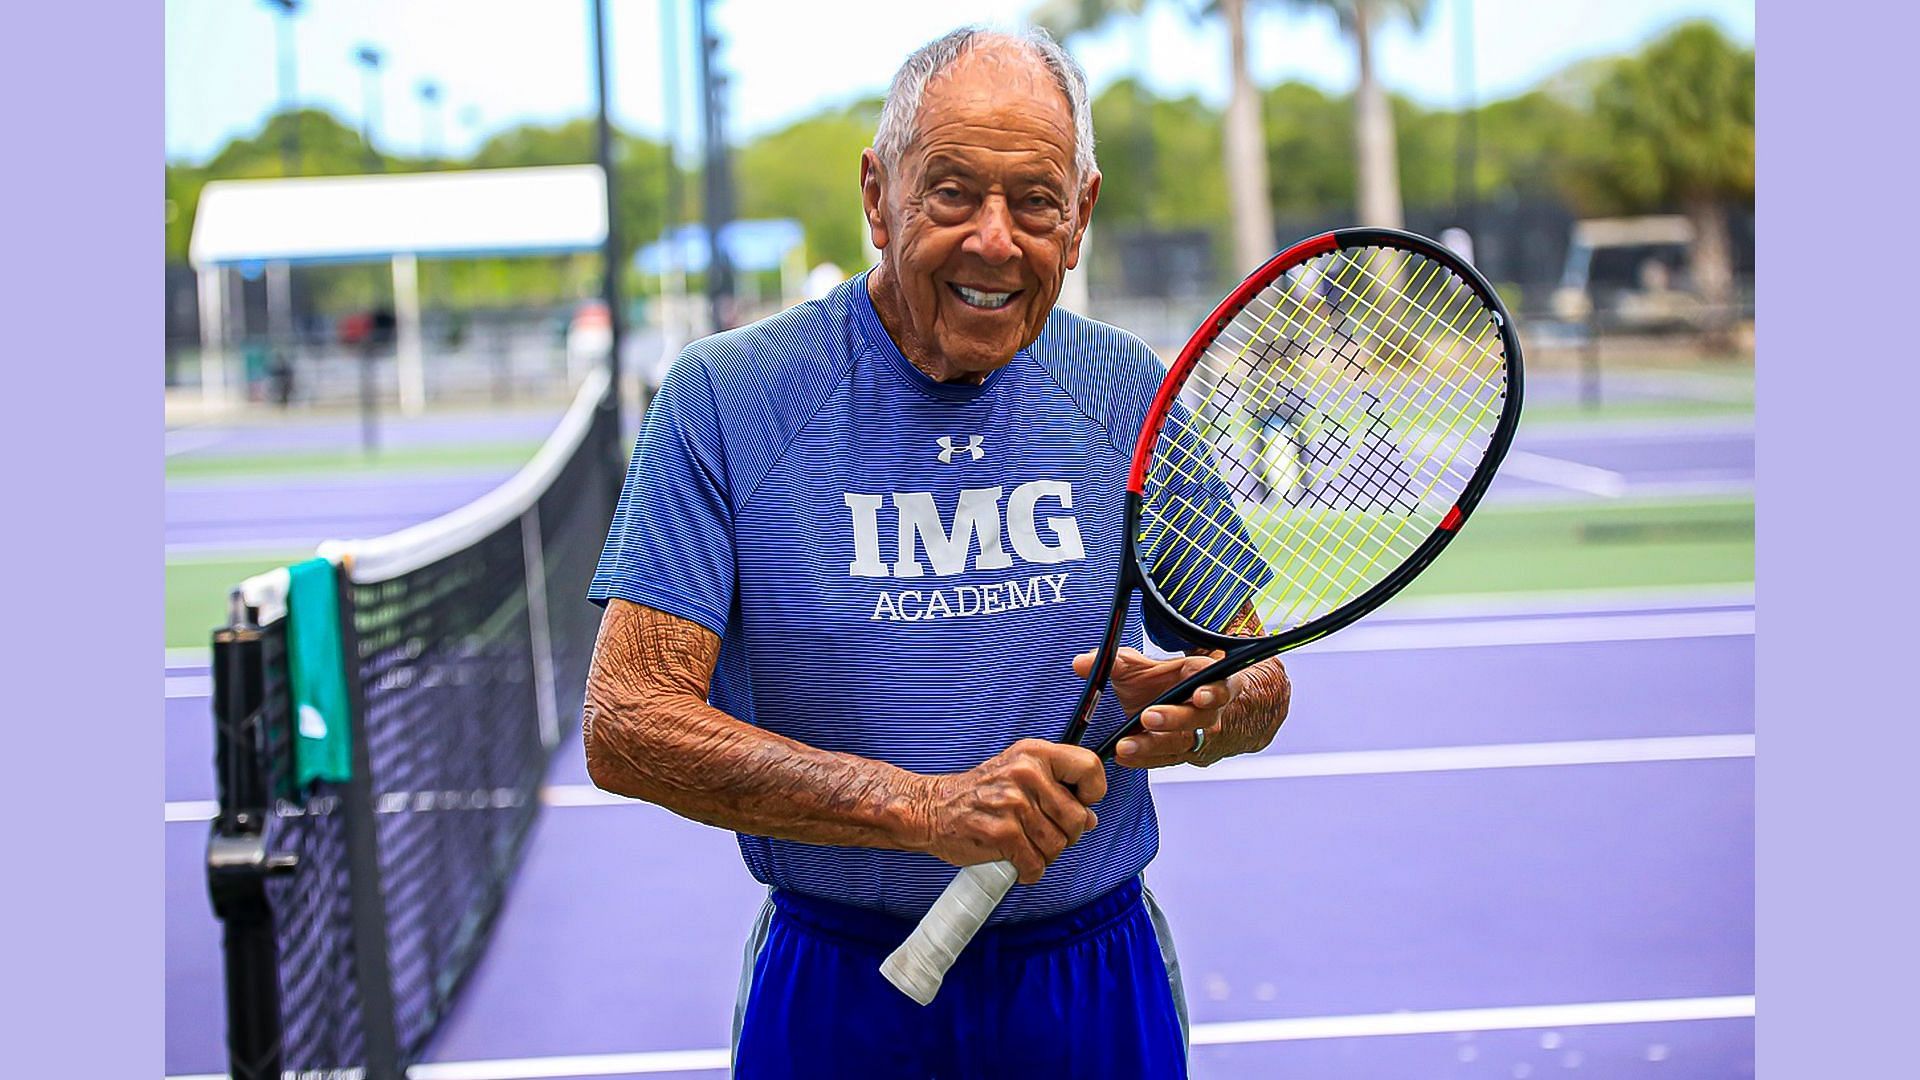 Nick Bollettieri puts end to his death rumors